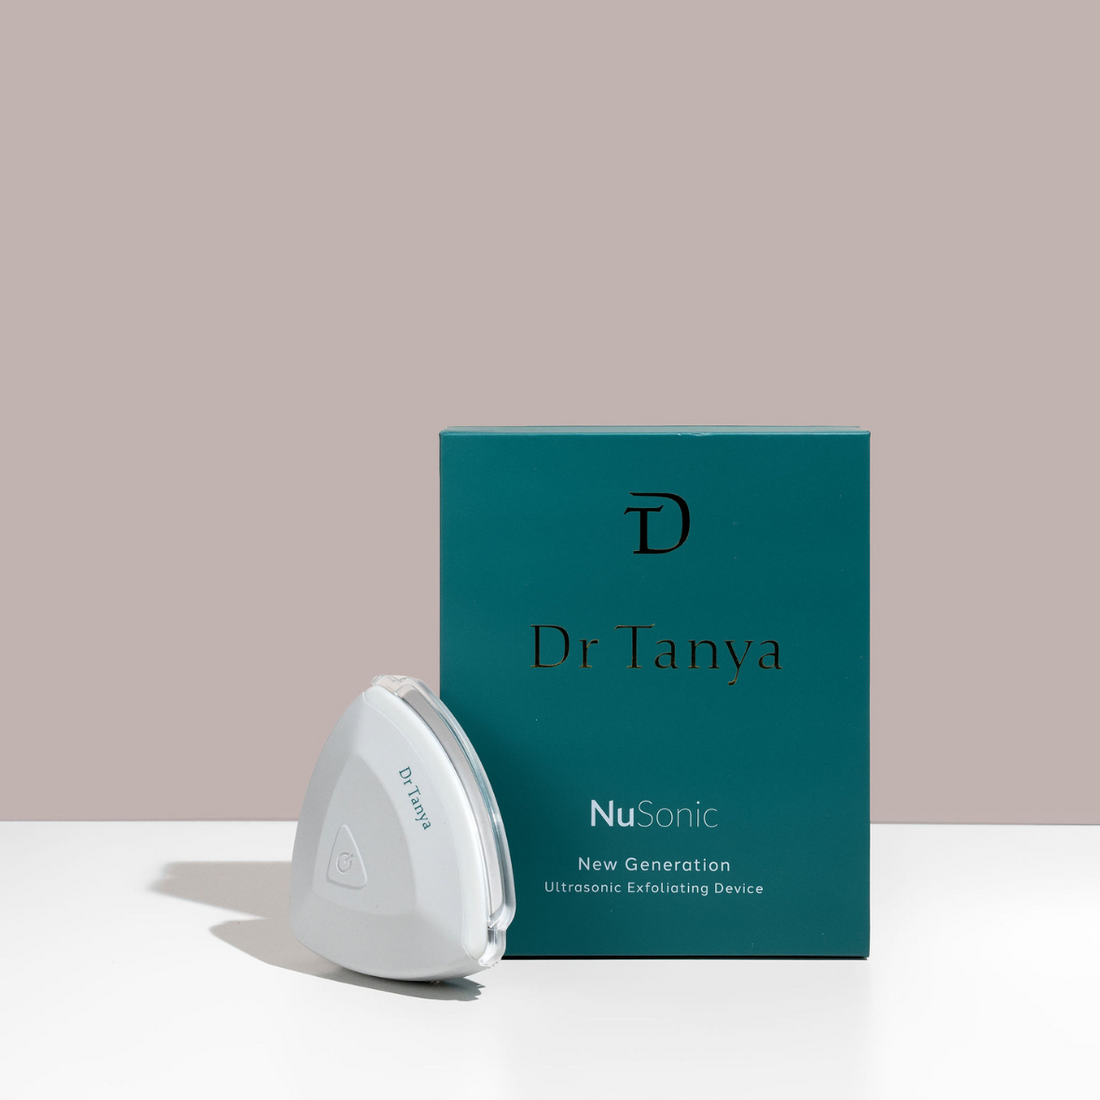 The Dr Tanya NuSonic exfoliator propped against a green box